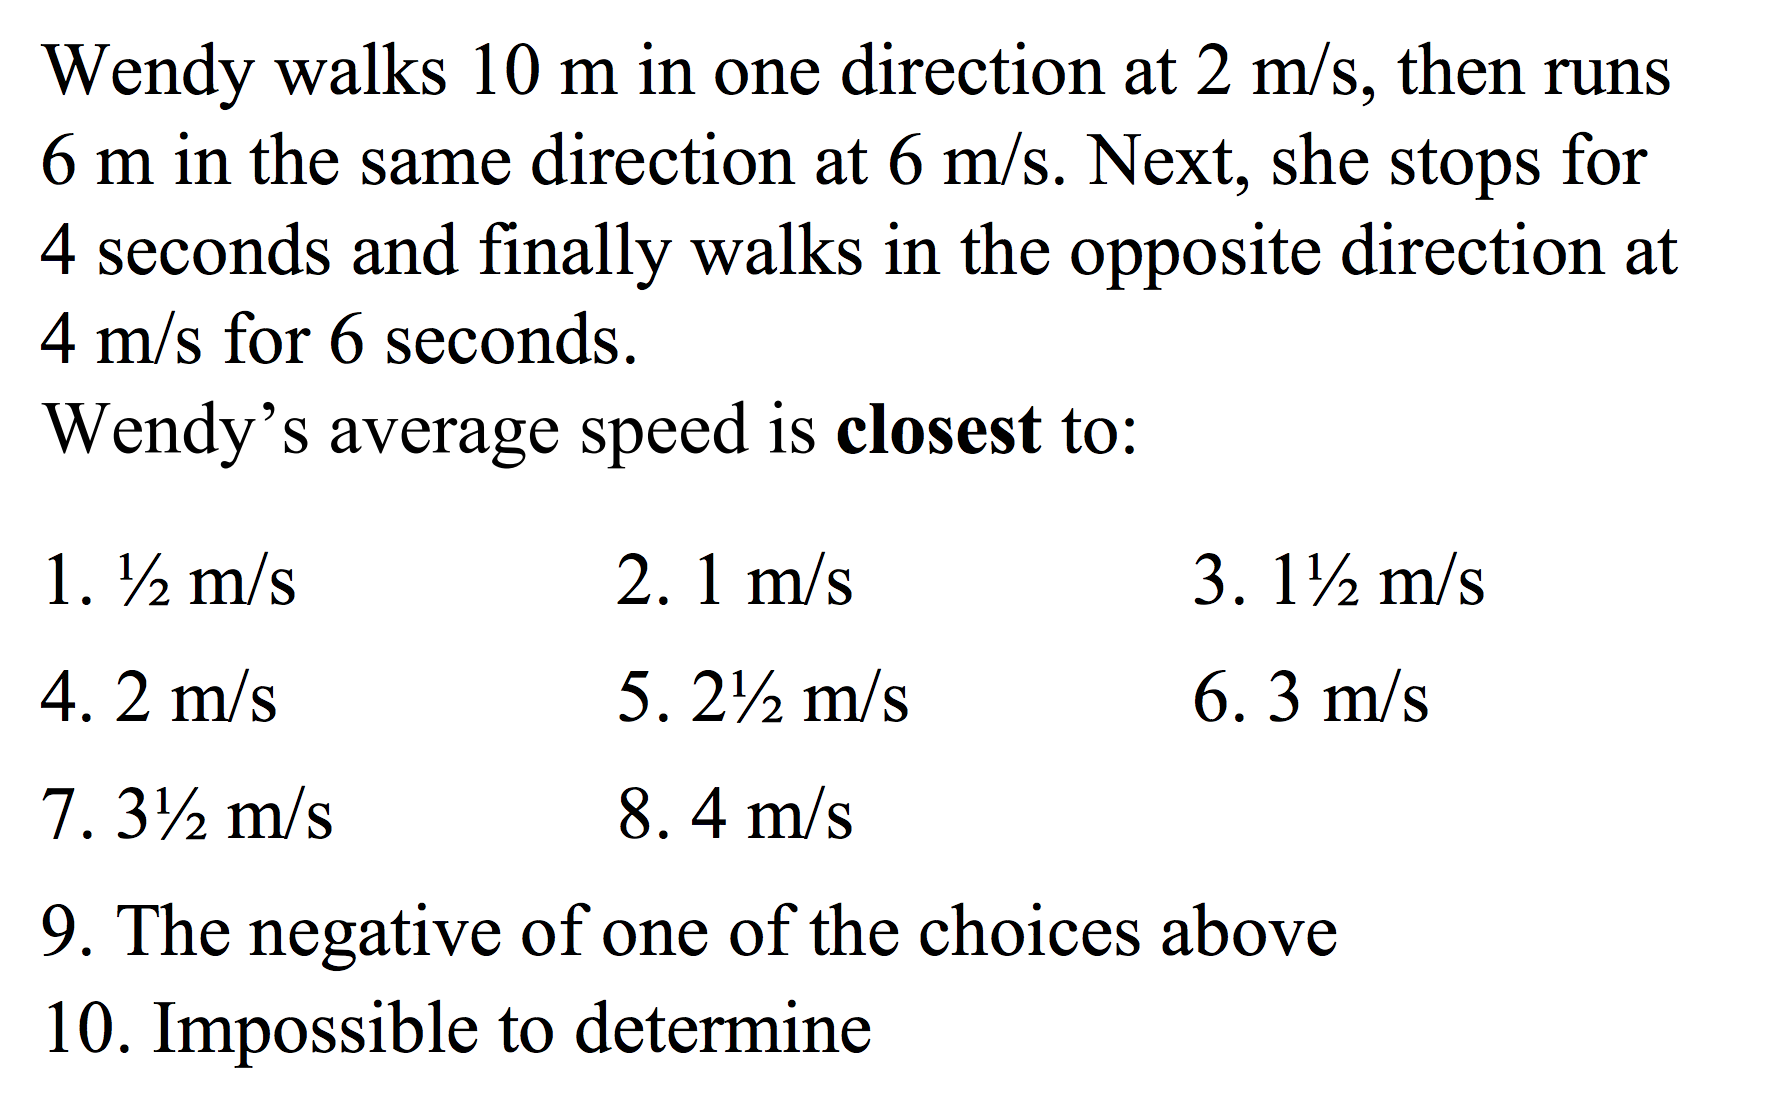 Wendy walks 10 m in one direction at 2 m/s, then runs
6 m in the same direction at 6 m/s. Next, she stops for
4 seconds and finally walks in the opposite direction at
4 m/s for 6 seconds.
Wendy's average speed is closest to:
1. m/s
3. 1½ m/s
2. 1 m/s
4.2 m/s
6.3 m/s
5. 22 m/s
7.32 m/s
8. 4 m/s
9. The negative of one of the choices above
10. Impossible to determine
